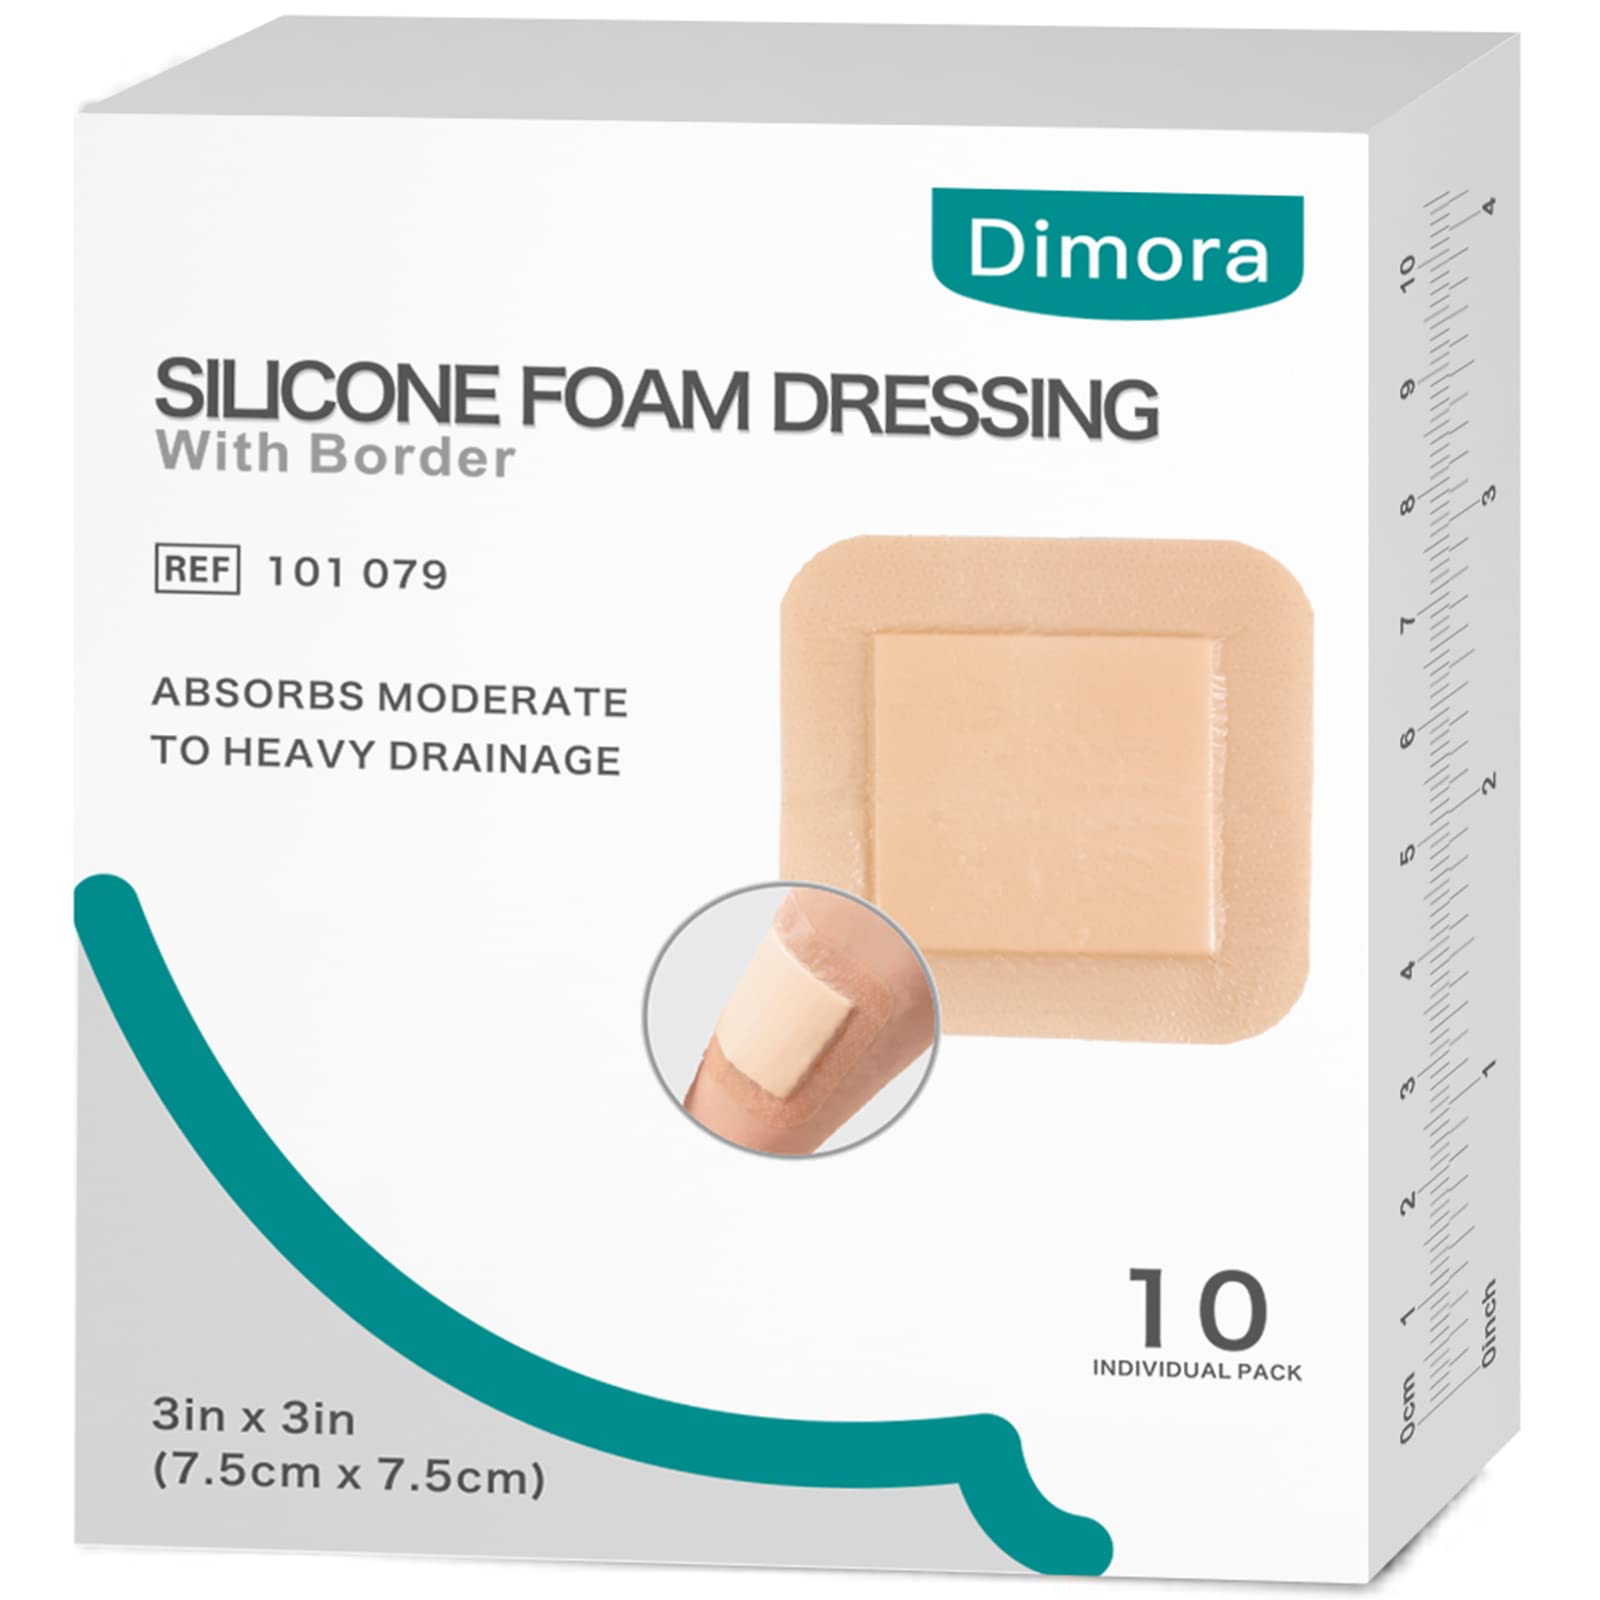 Dimora Silicone Foam Dressing with Border Adhesive Waterproof Wound Dressing Bandage  3